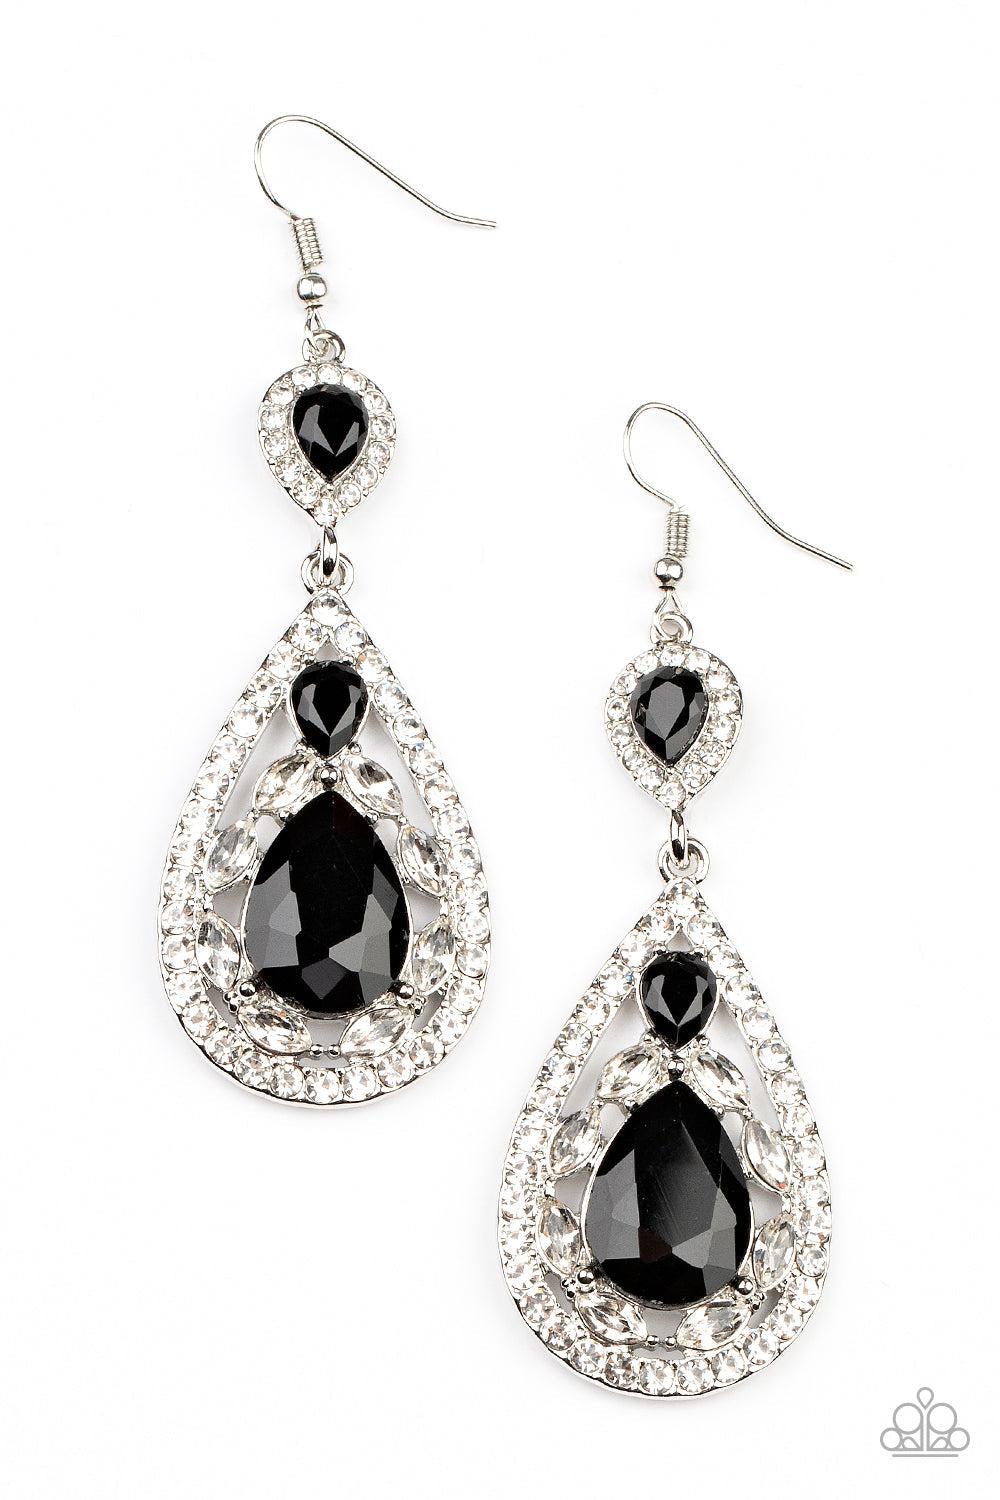 Posh Pageantry Black and White Rhinestone Earrings - Paparazzi Accessories- lightbox - CarasShop.com - $5 Jewelry by Cara Jewels